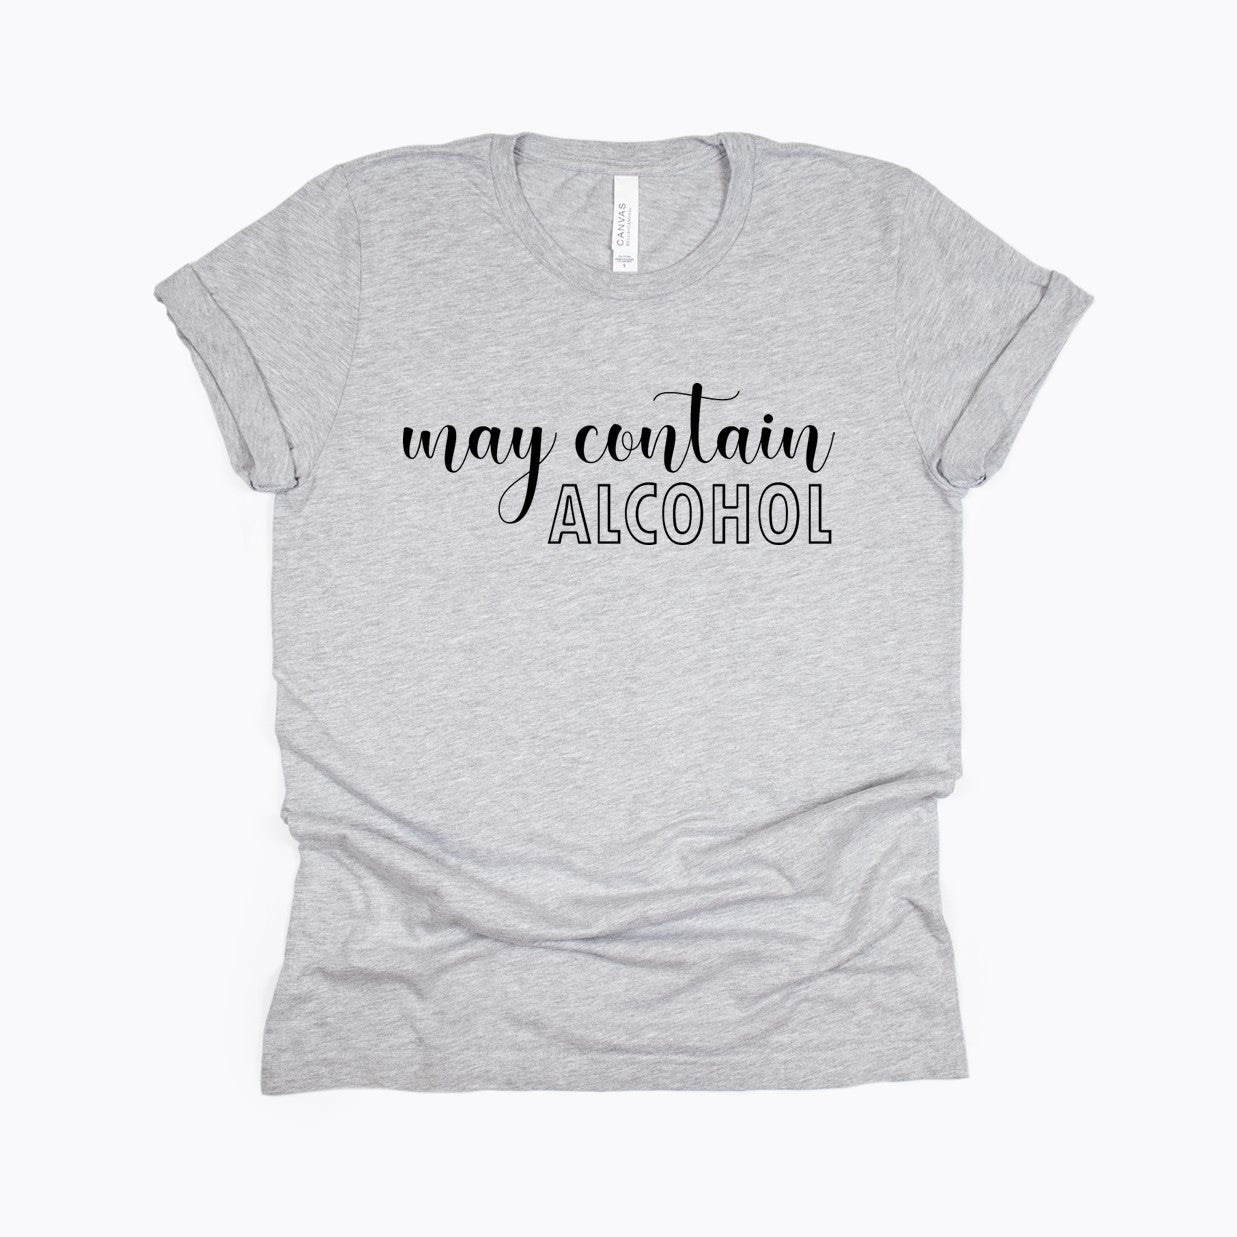 May Contain Alcohol - Funny Drinking T-shirt